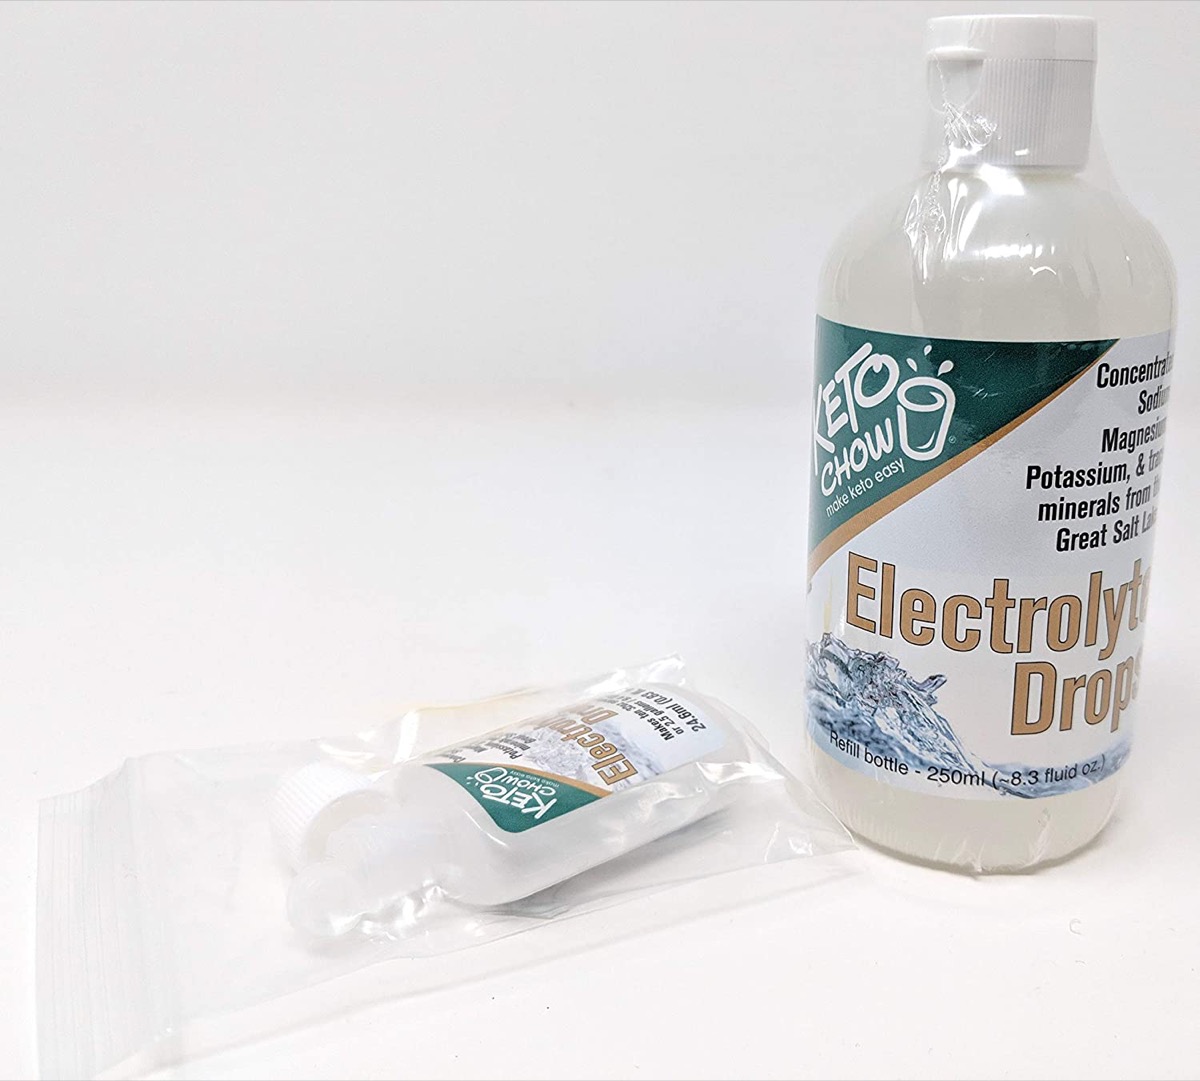 two bottles of keto chow electrolyte drops on white background